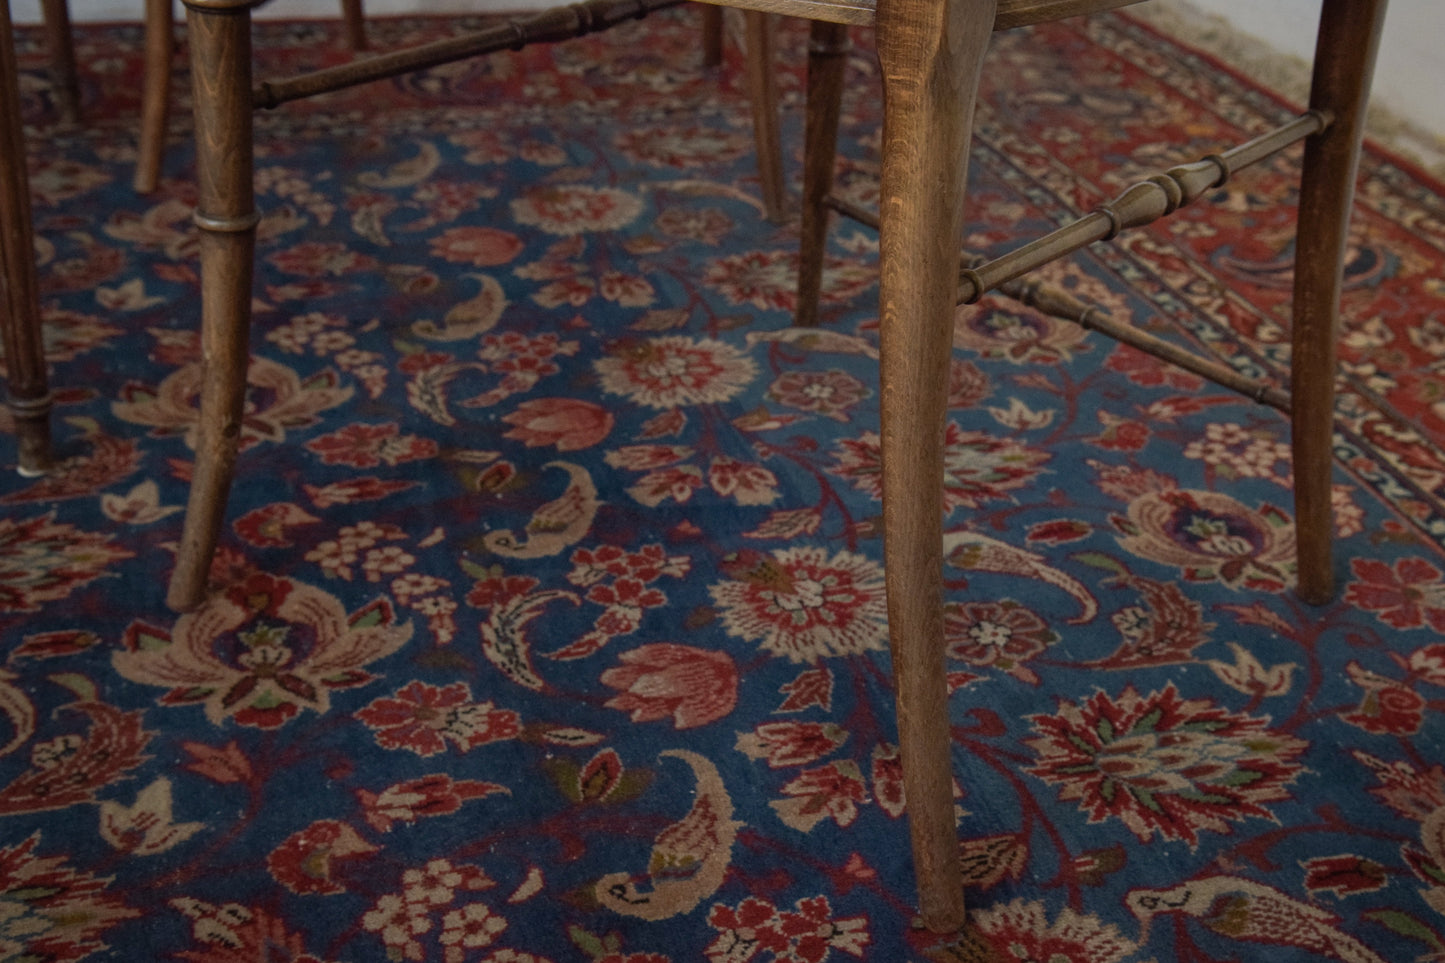 Elegant Vintage Games Table - With Four Matching Bergere Chairs